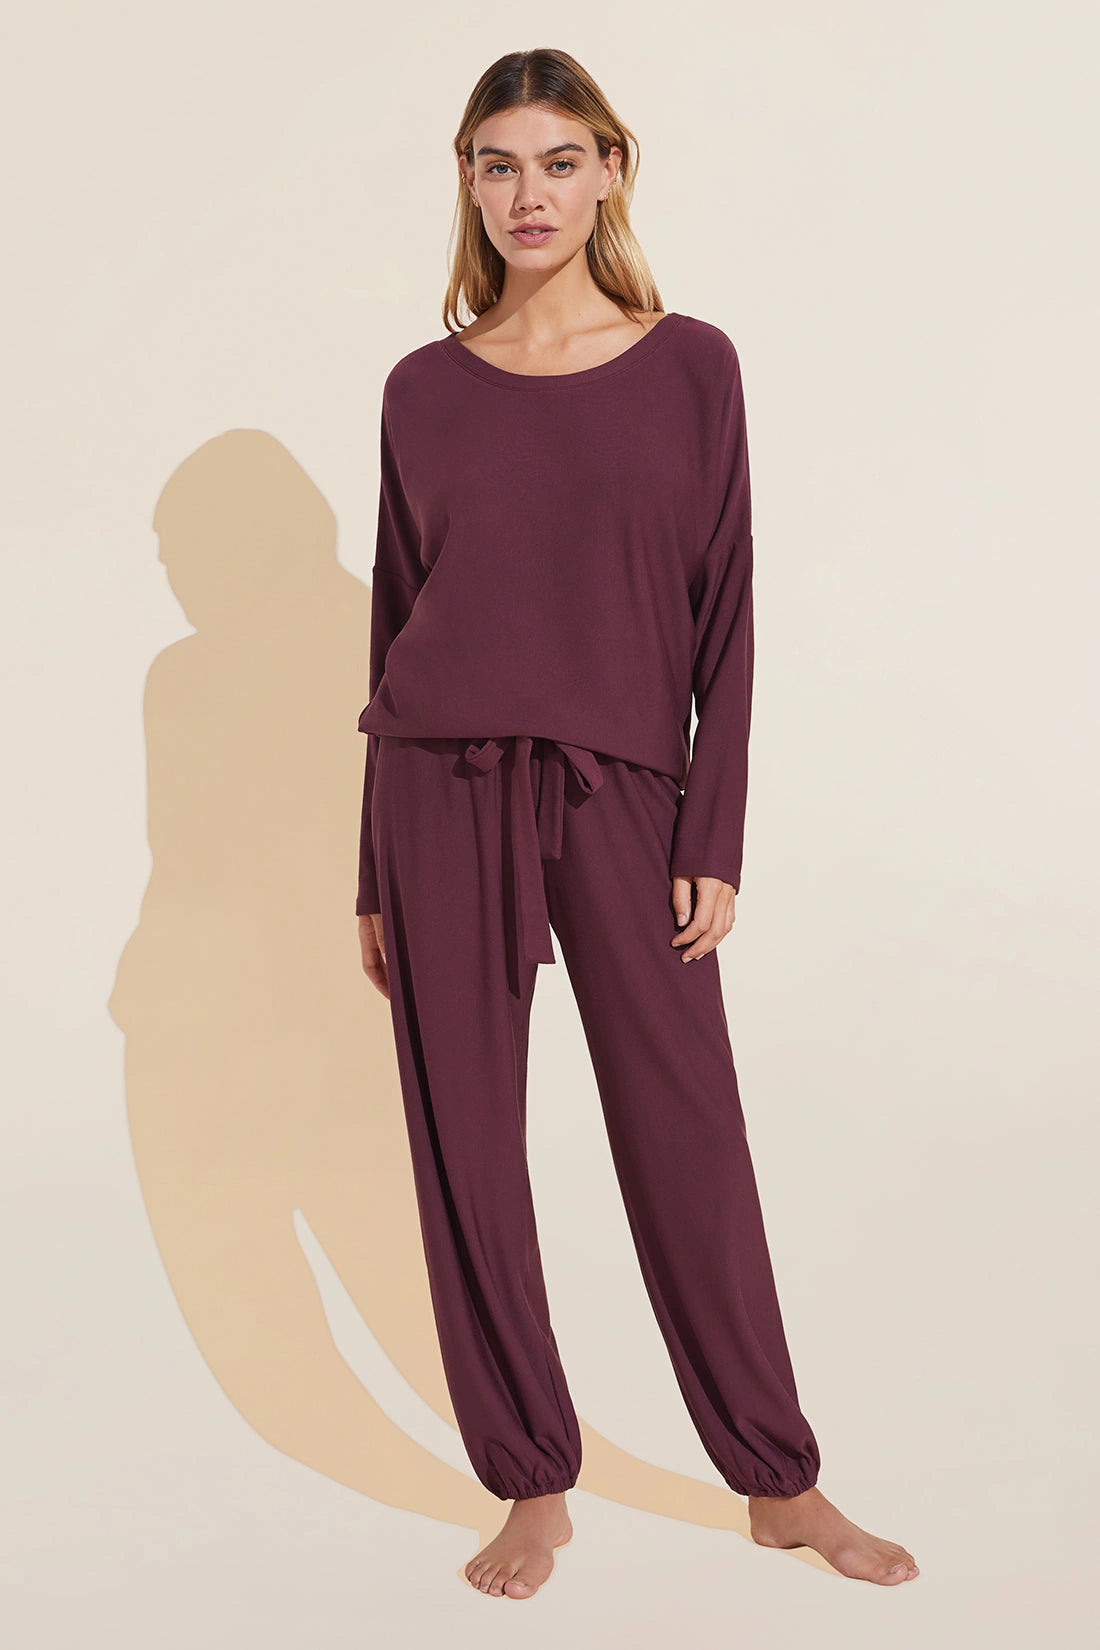 %shop_name_% Eberjey_Softest Sweats Slouchy Top and Crop Pant Set _ Loungewear_ 1700.00